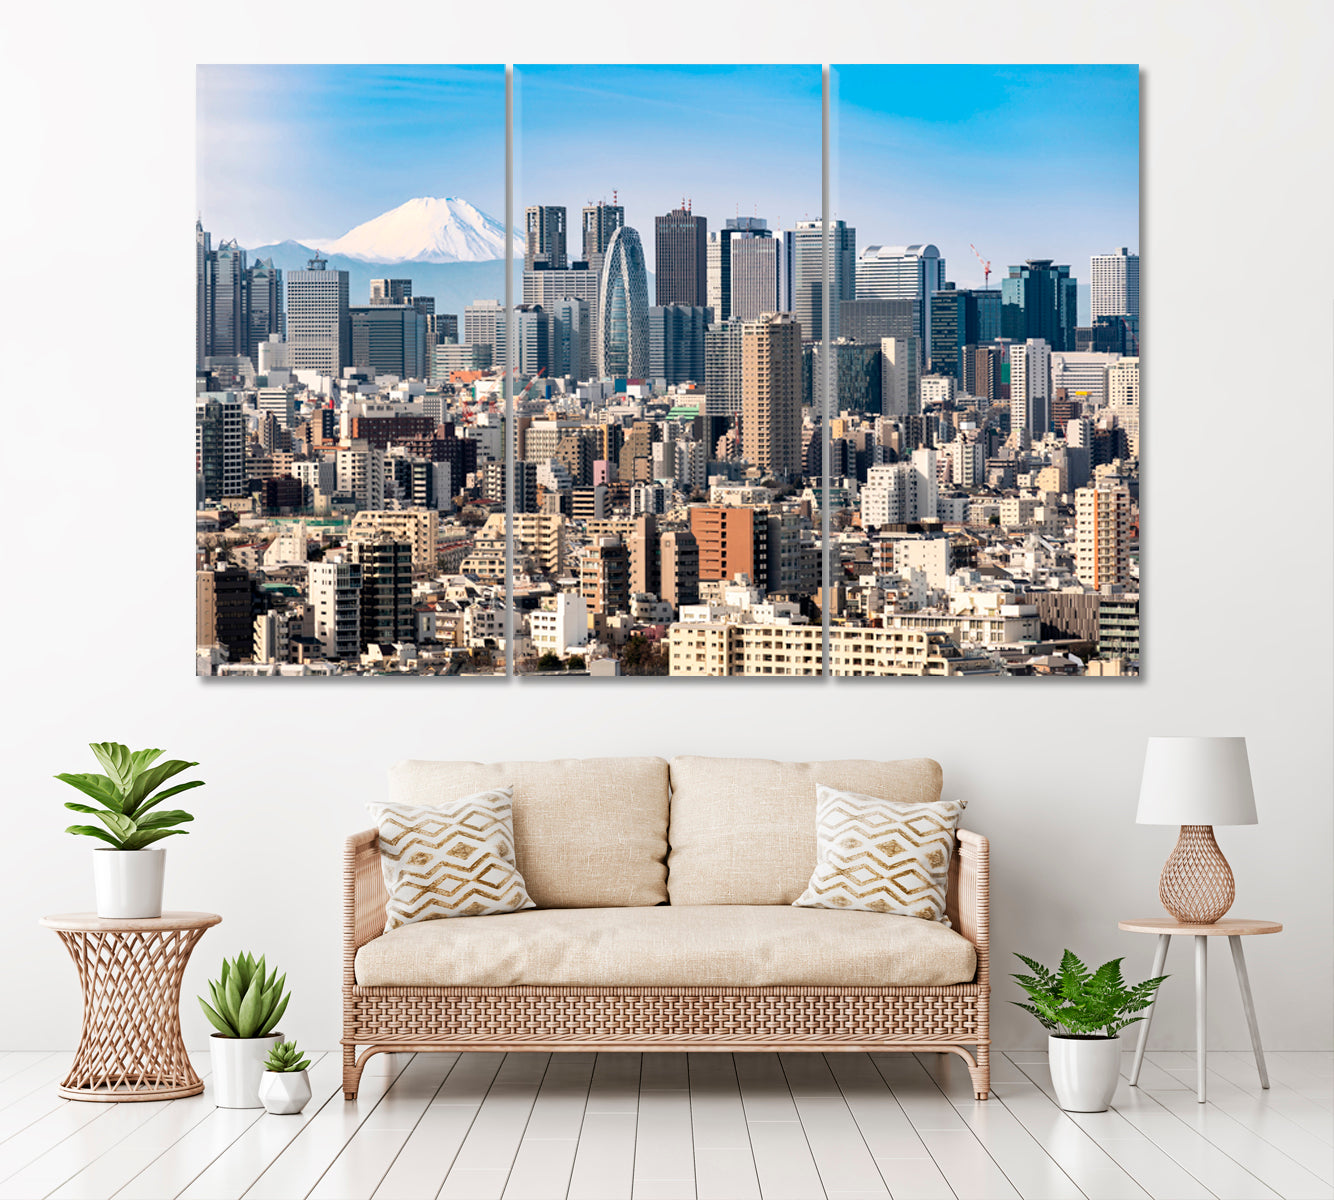 Mountain Fuji with Tokyo Skyline Canvas Print ArtLexy 3 Panels 36"x24" inches 